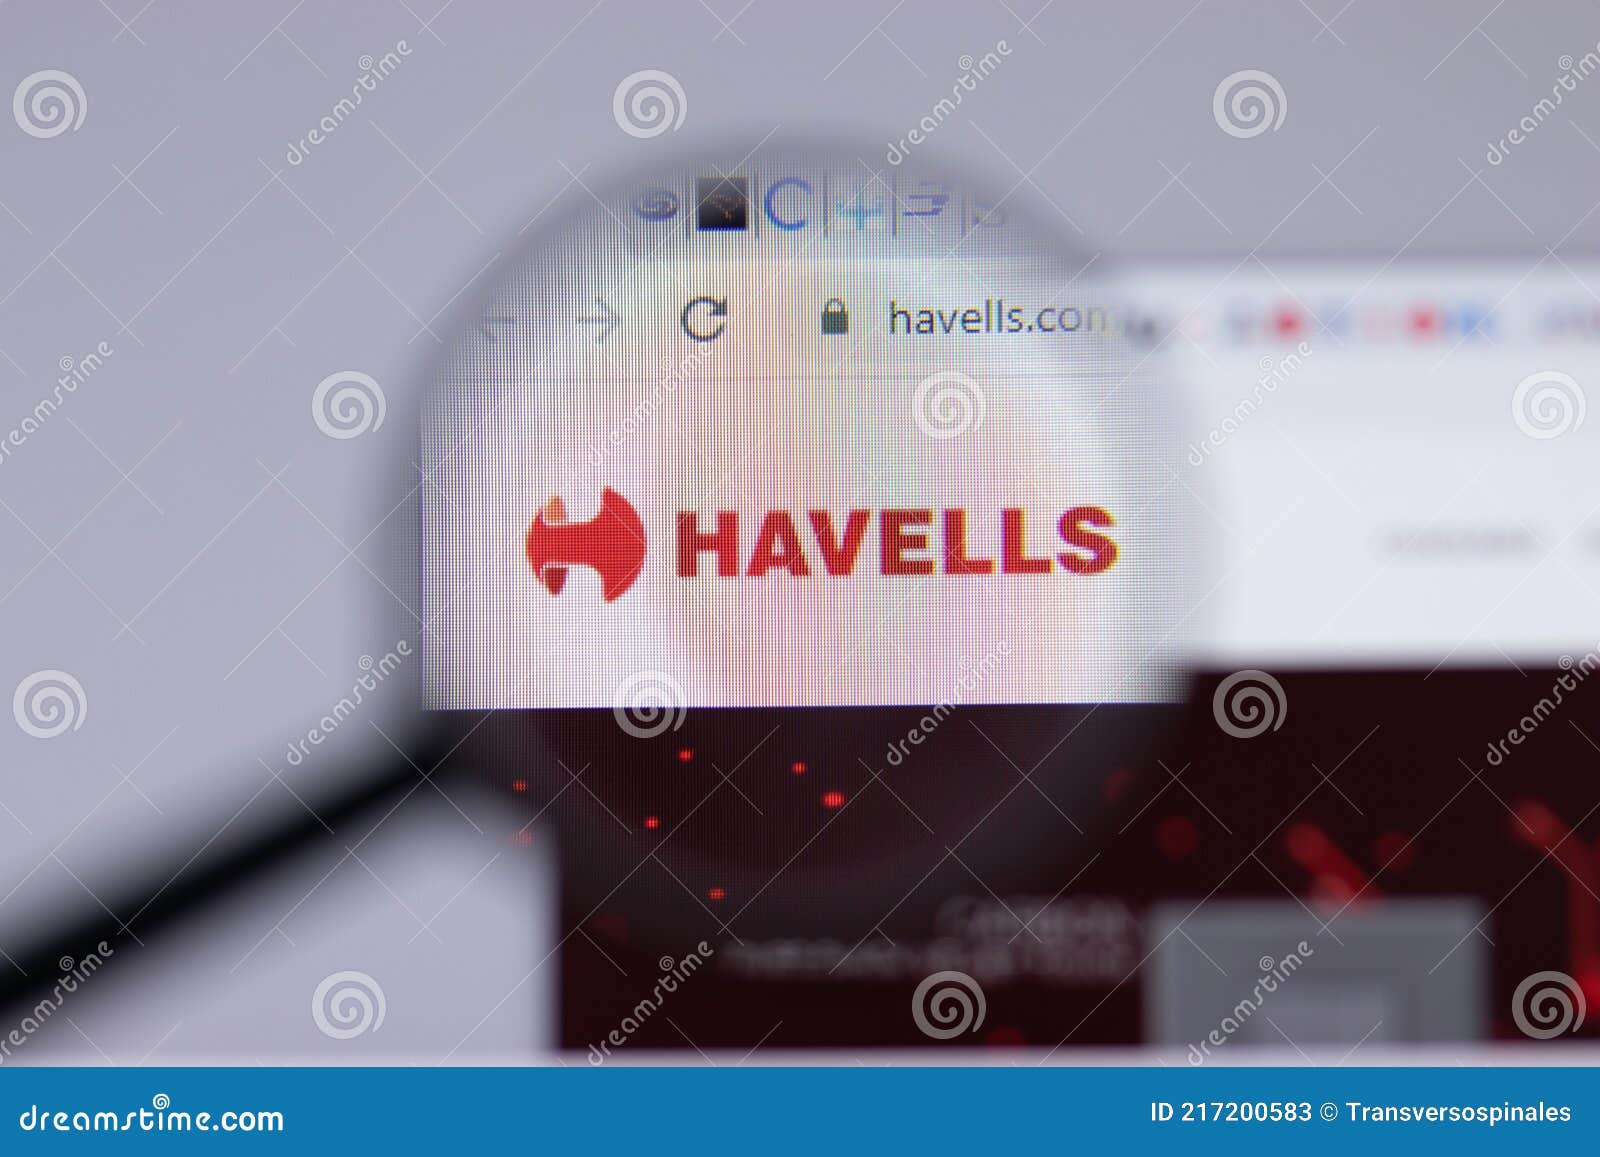 Electro world - Havells Galaxy - Electrical Equipment Supplier in Indore